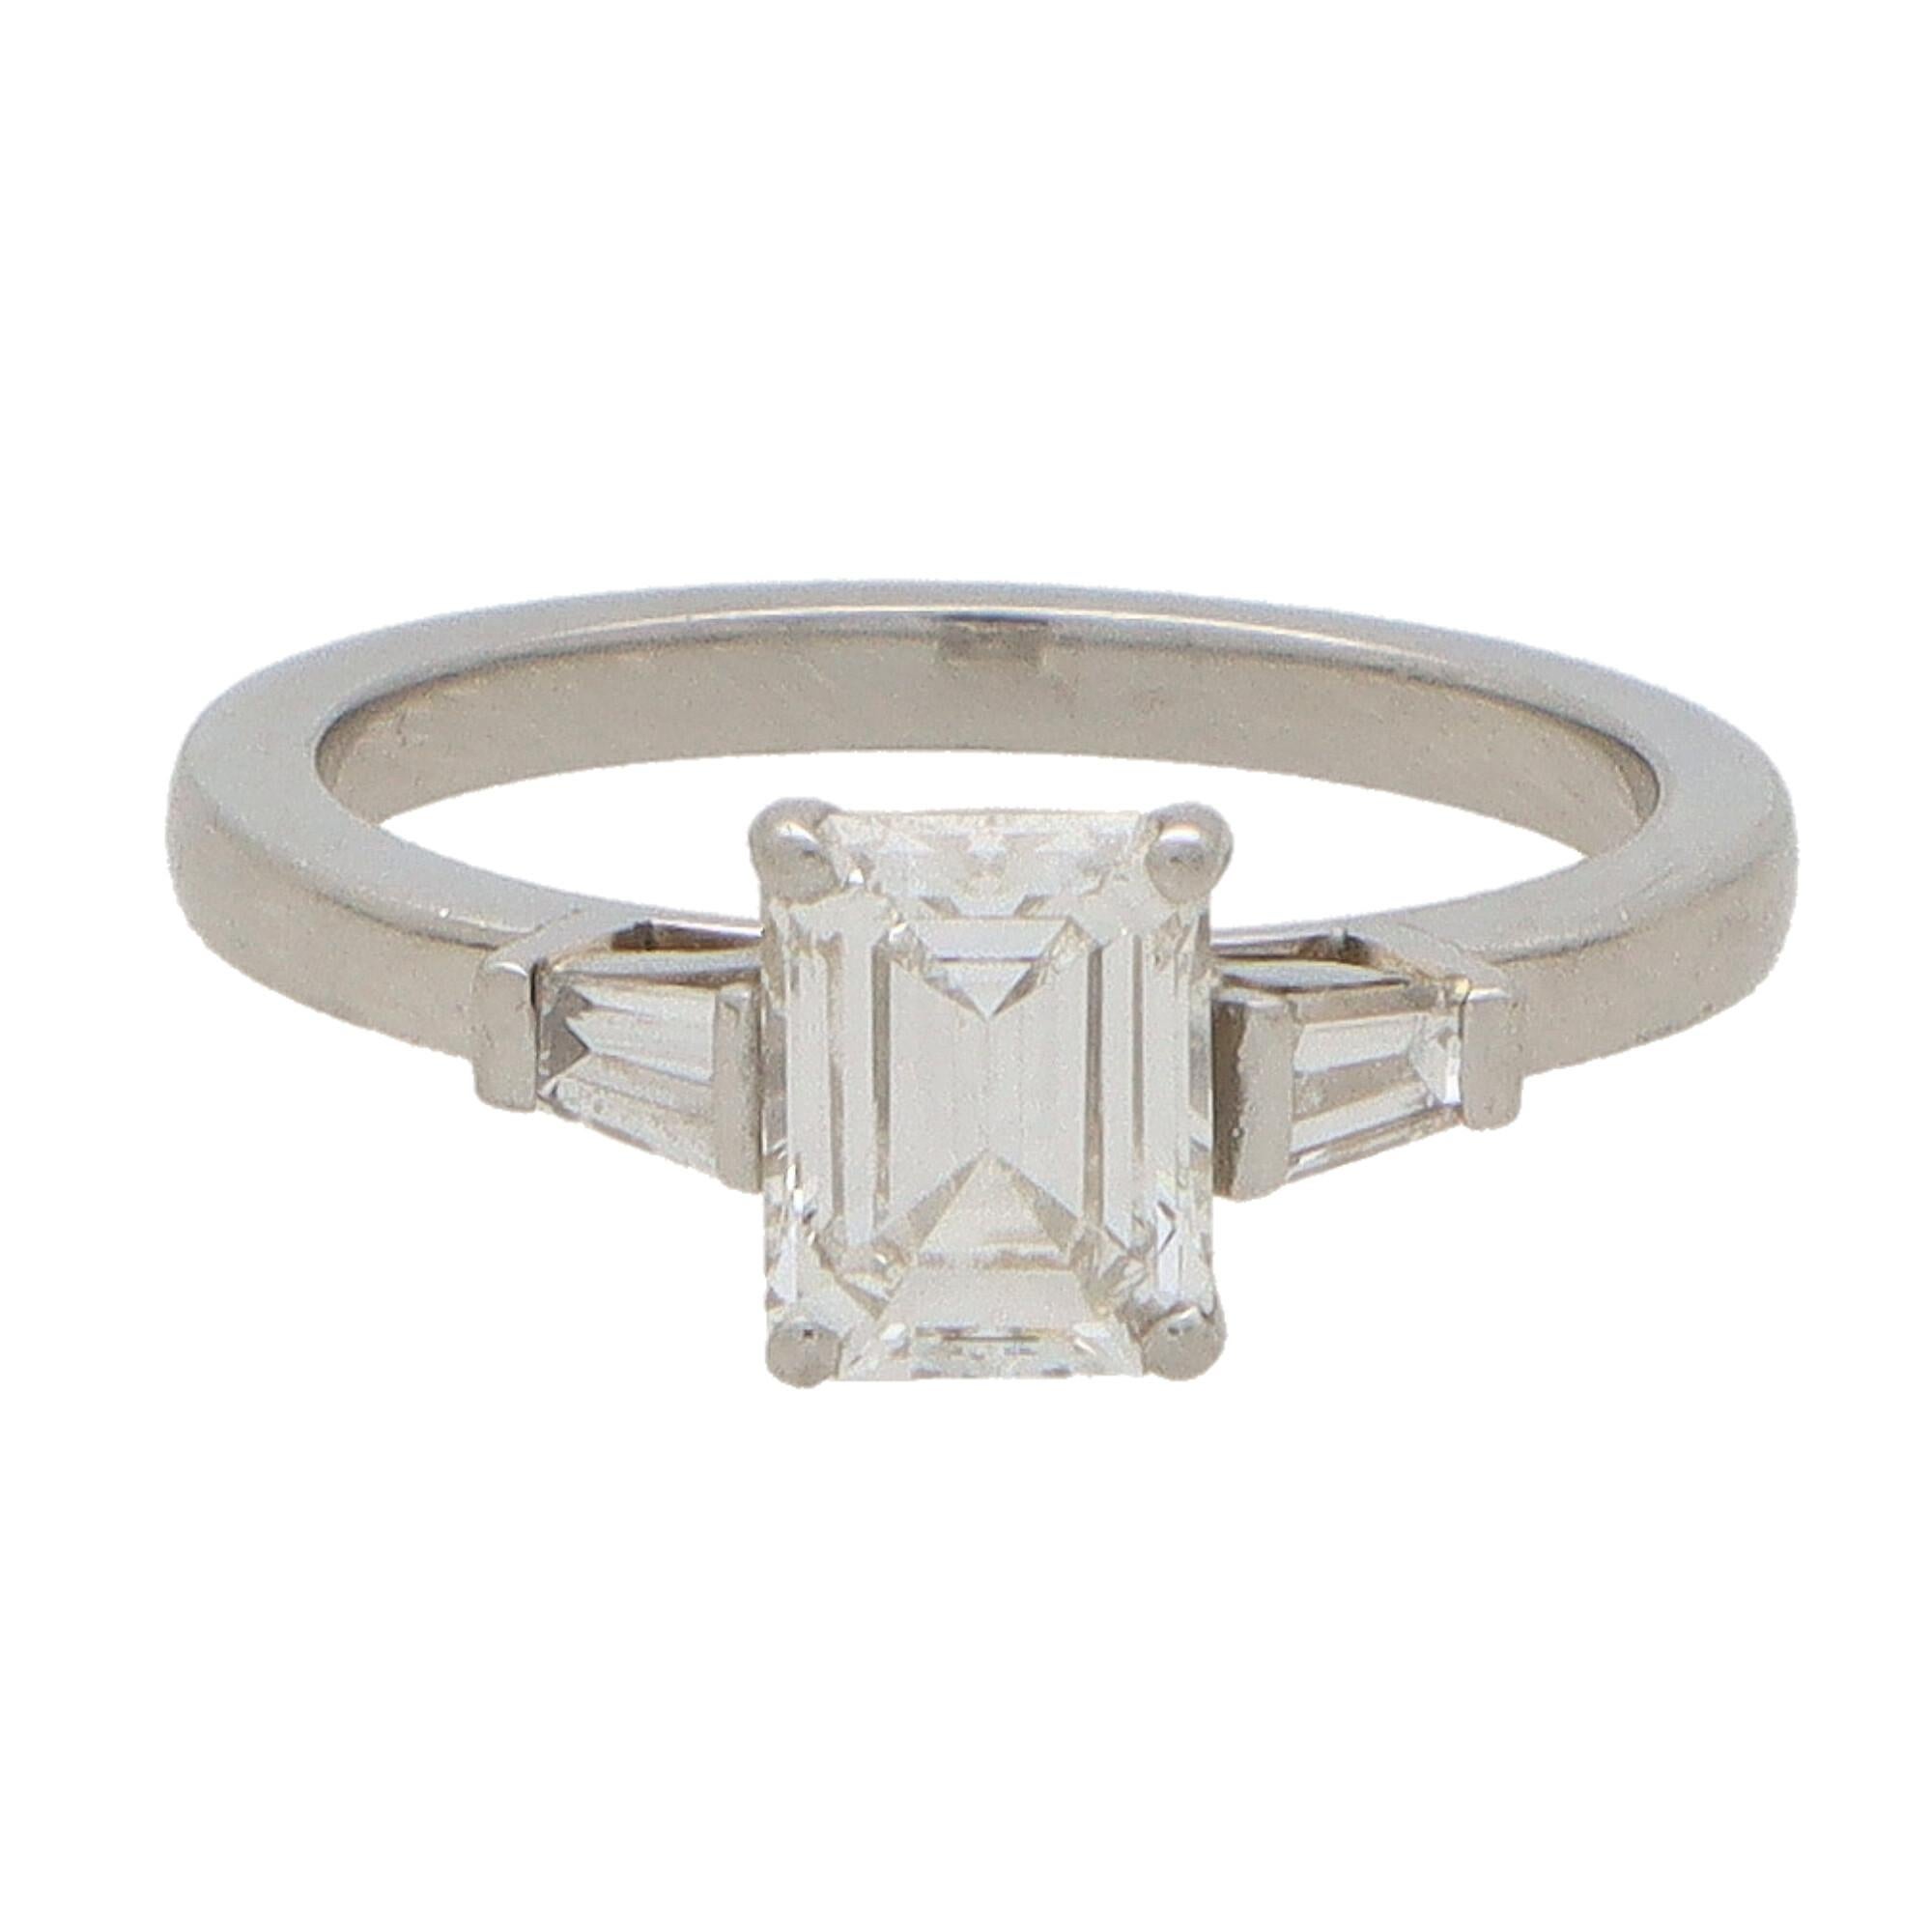 Certified Vintage Emerald Cut Diamond Ring Set in Platinum In Excellent Condition For Sale In London, GB